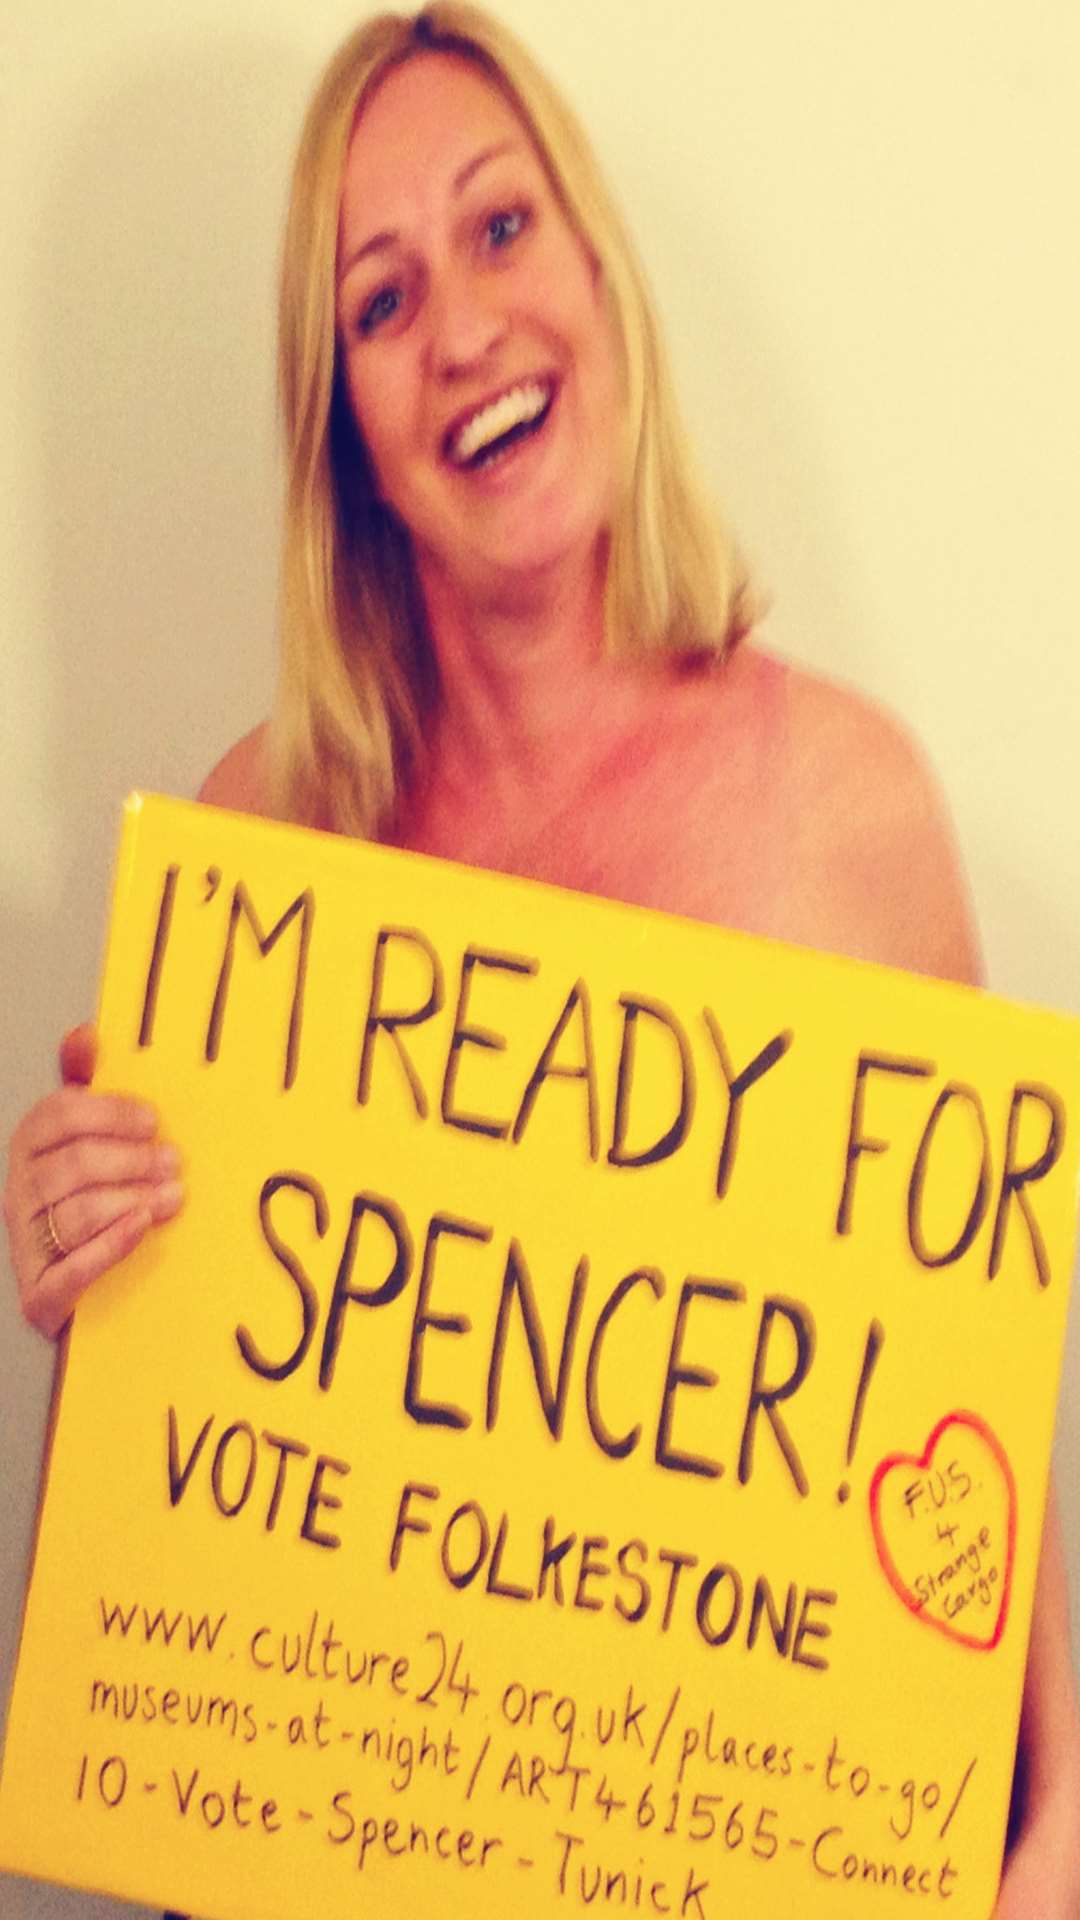 Kay McLoughlin set up the Ready for Spencer campaign